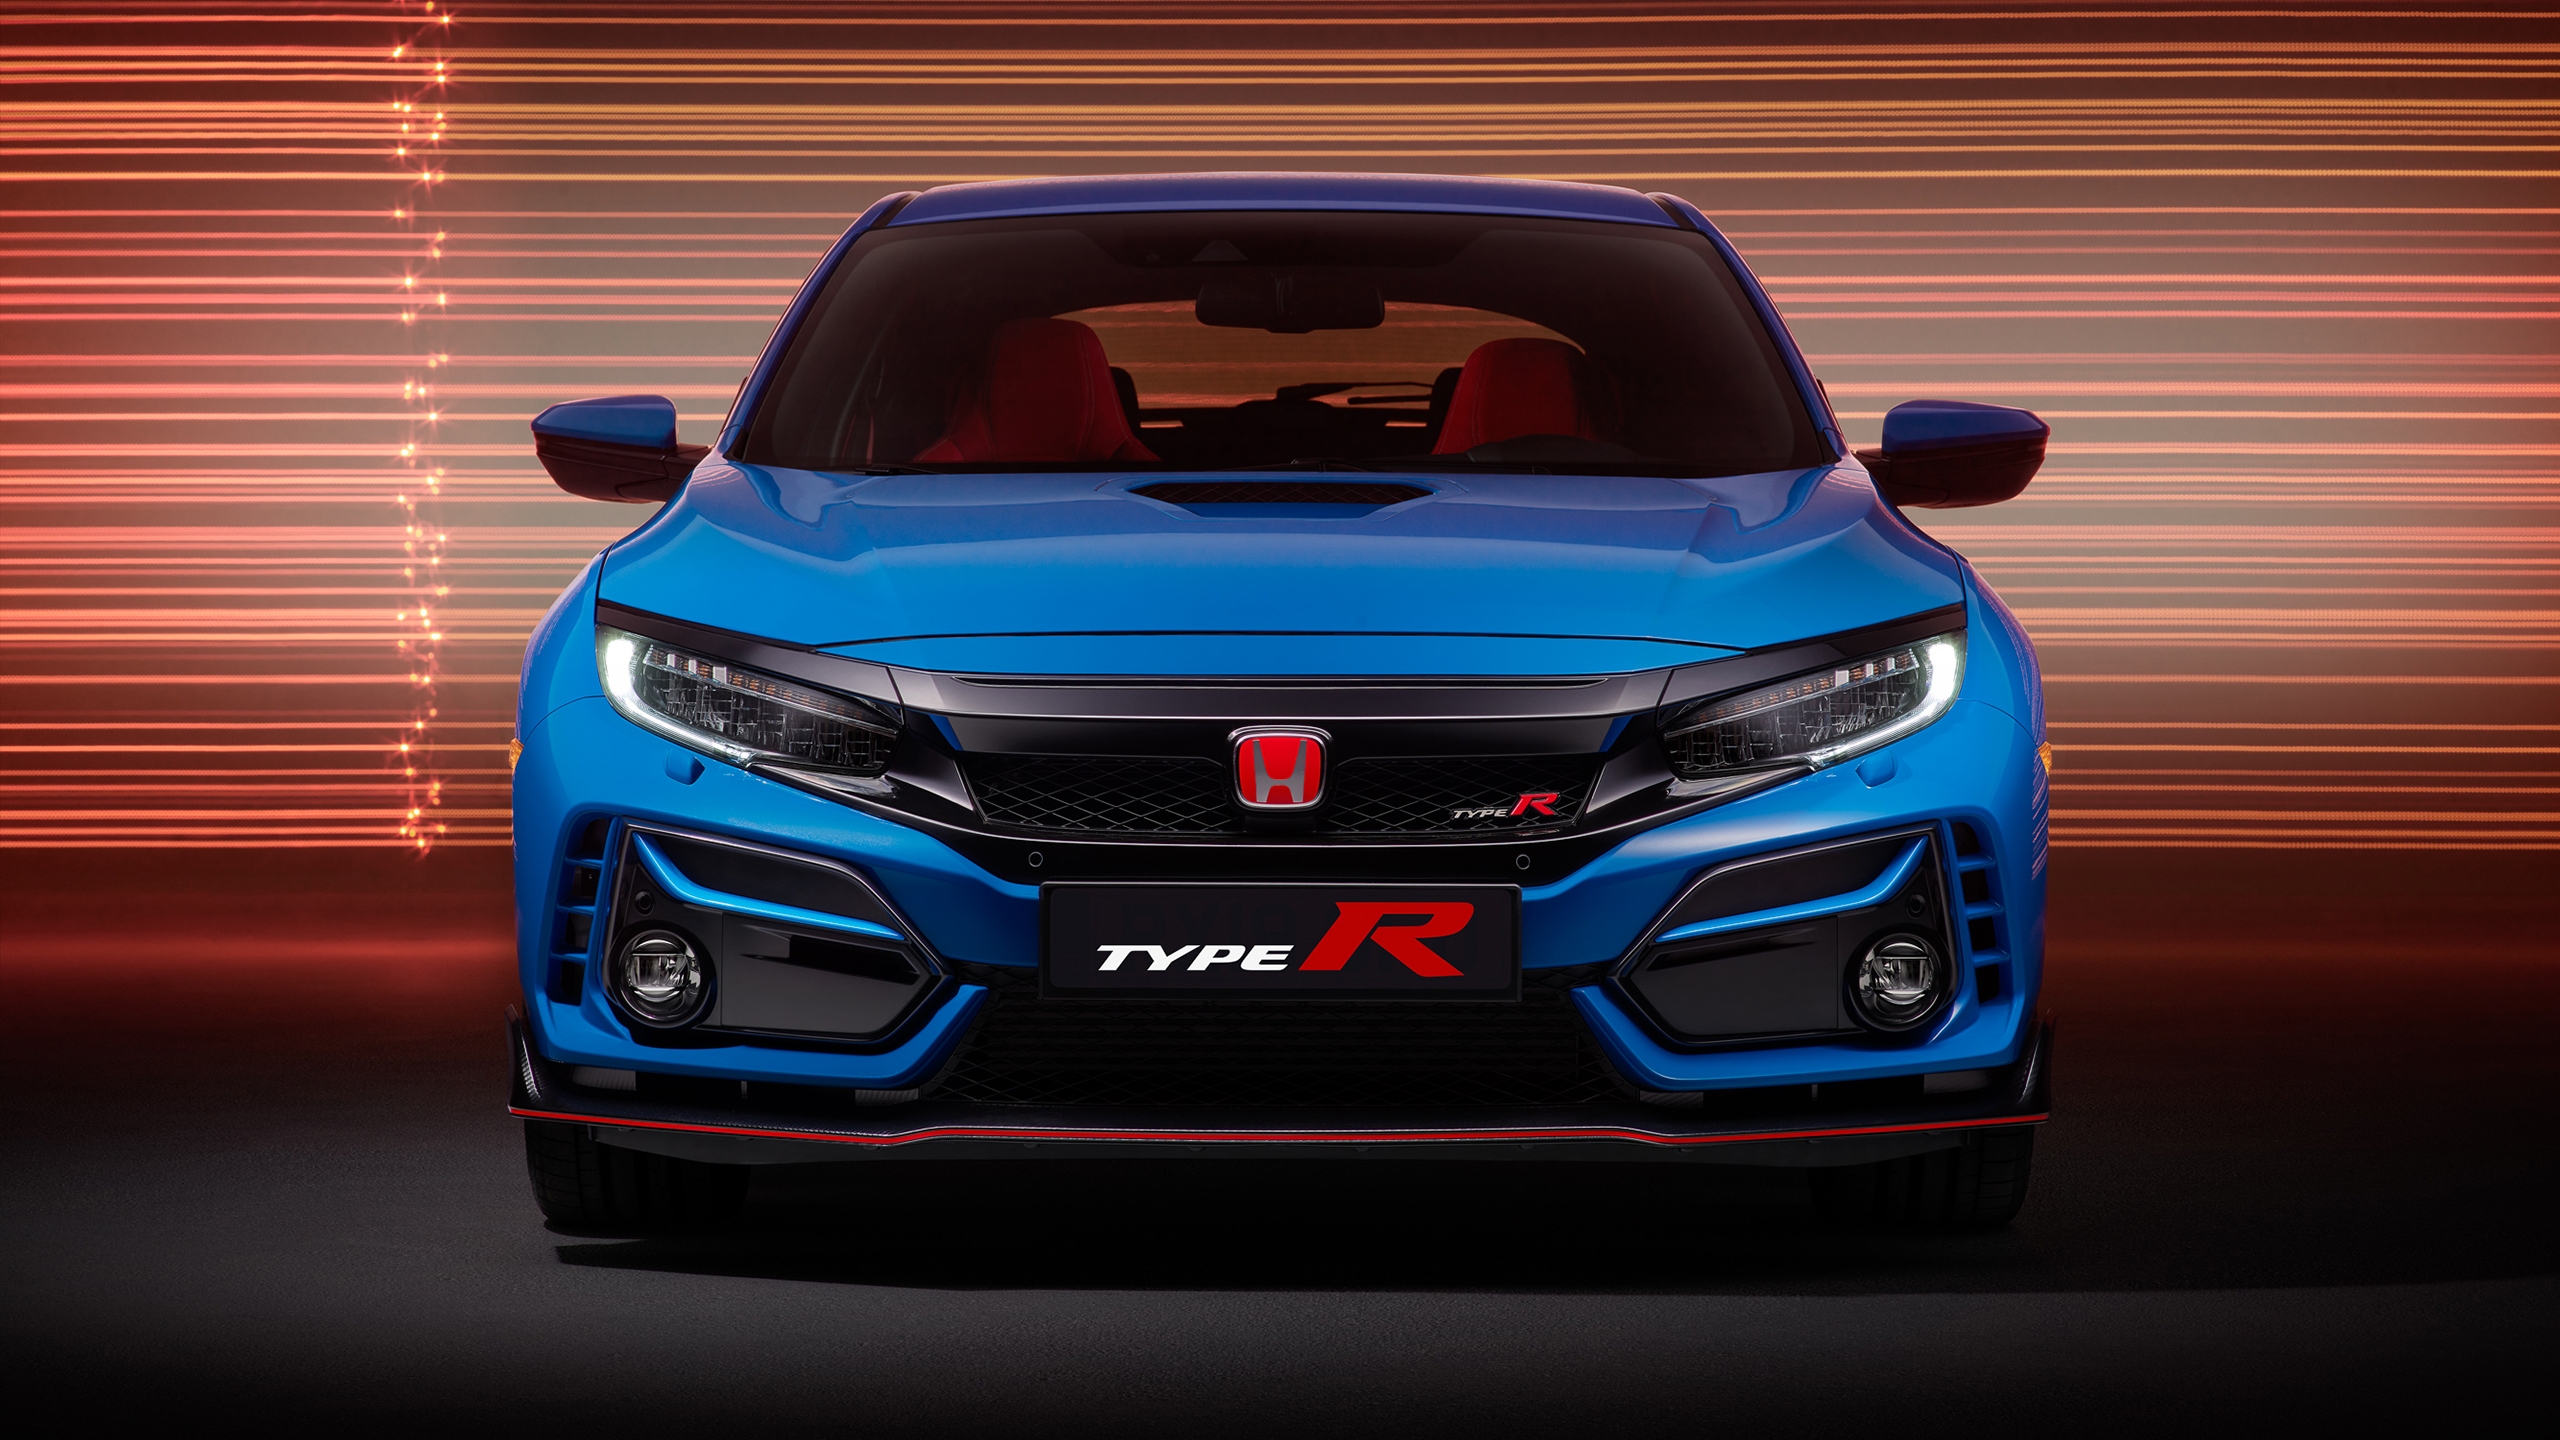 Photo Honda Civic Type R Gt Blue Sports Cars Pictures On